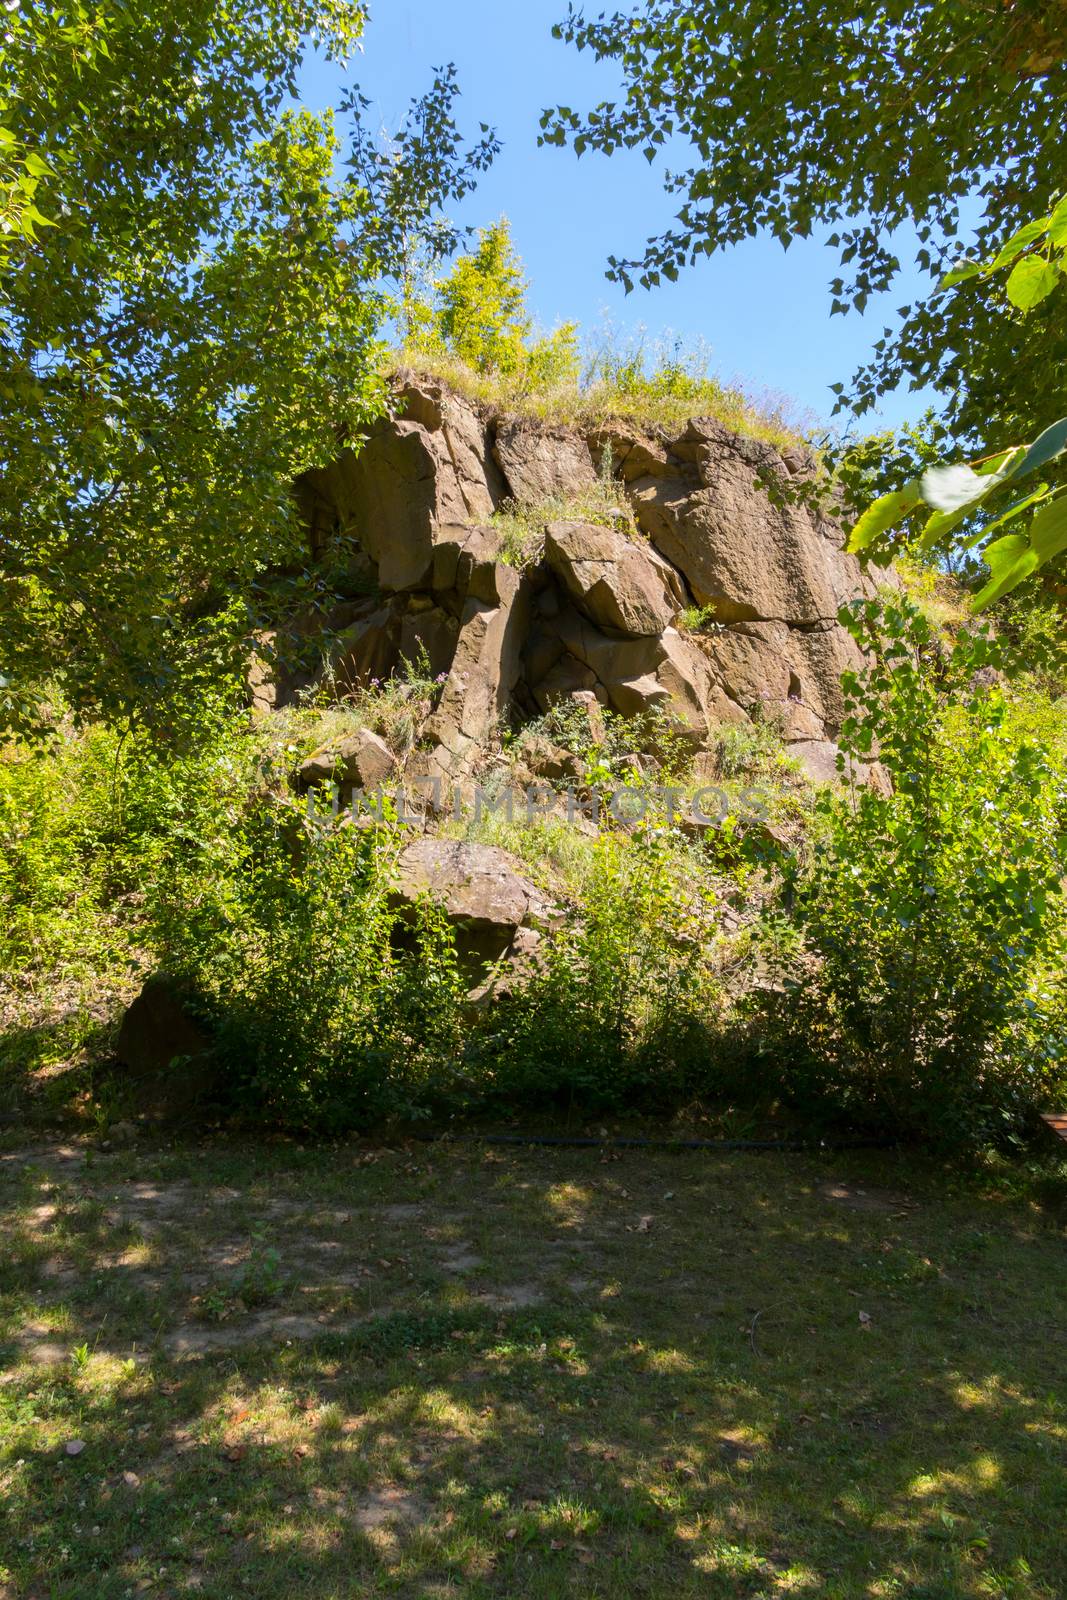 a whimsical form of a slide built of large stones in the shade of trees by Adamchuk